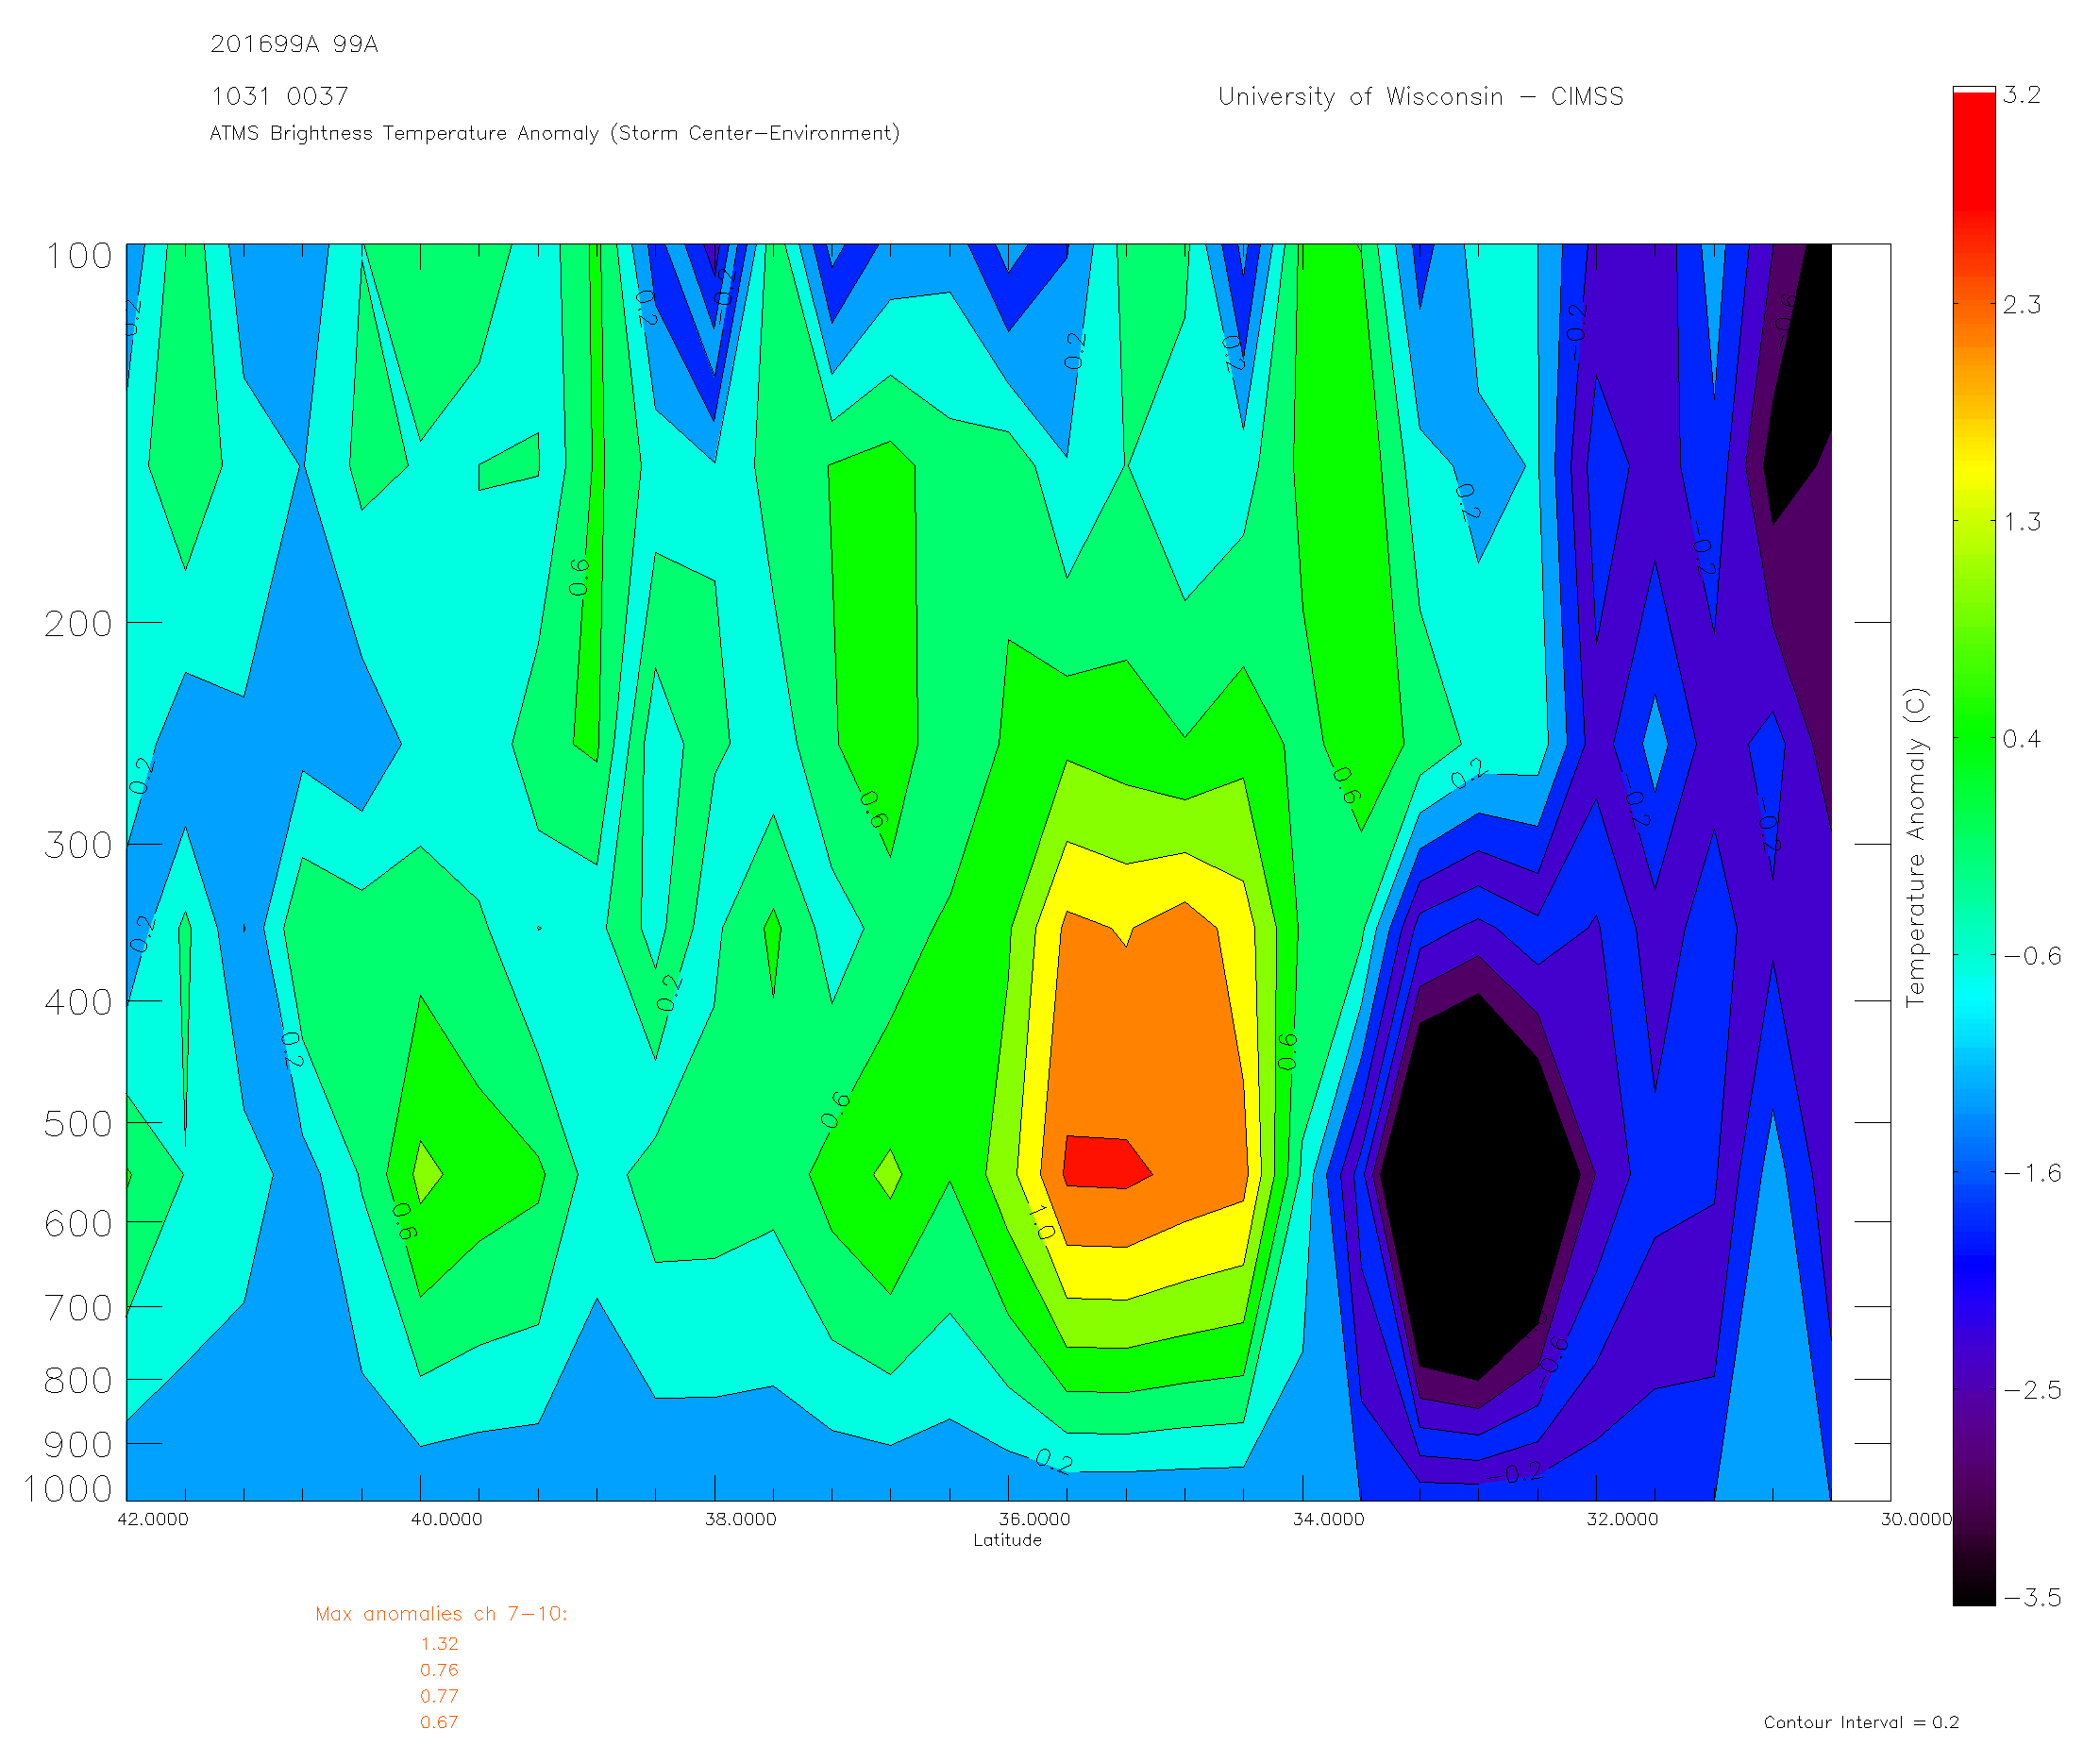 North-to-south vertical cross section of Suomi NPP ATMS brightness temperature anomaly [click to enlarge]